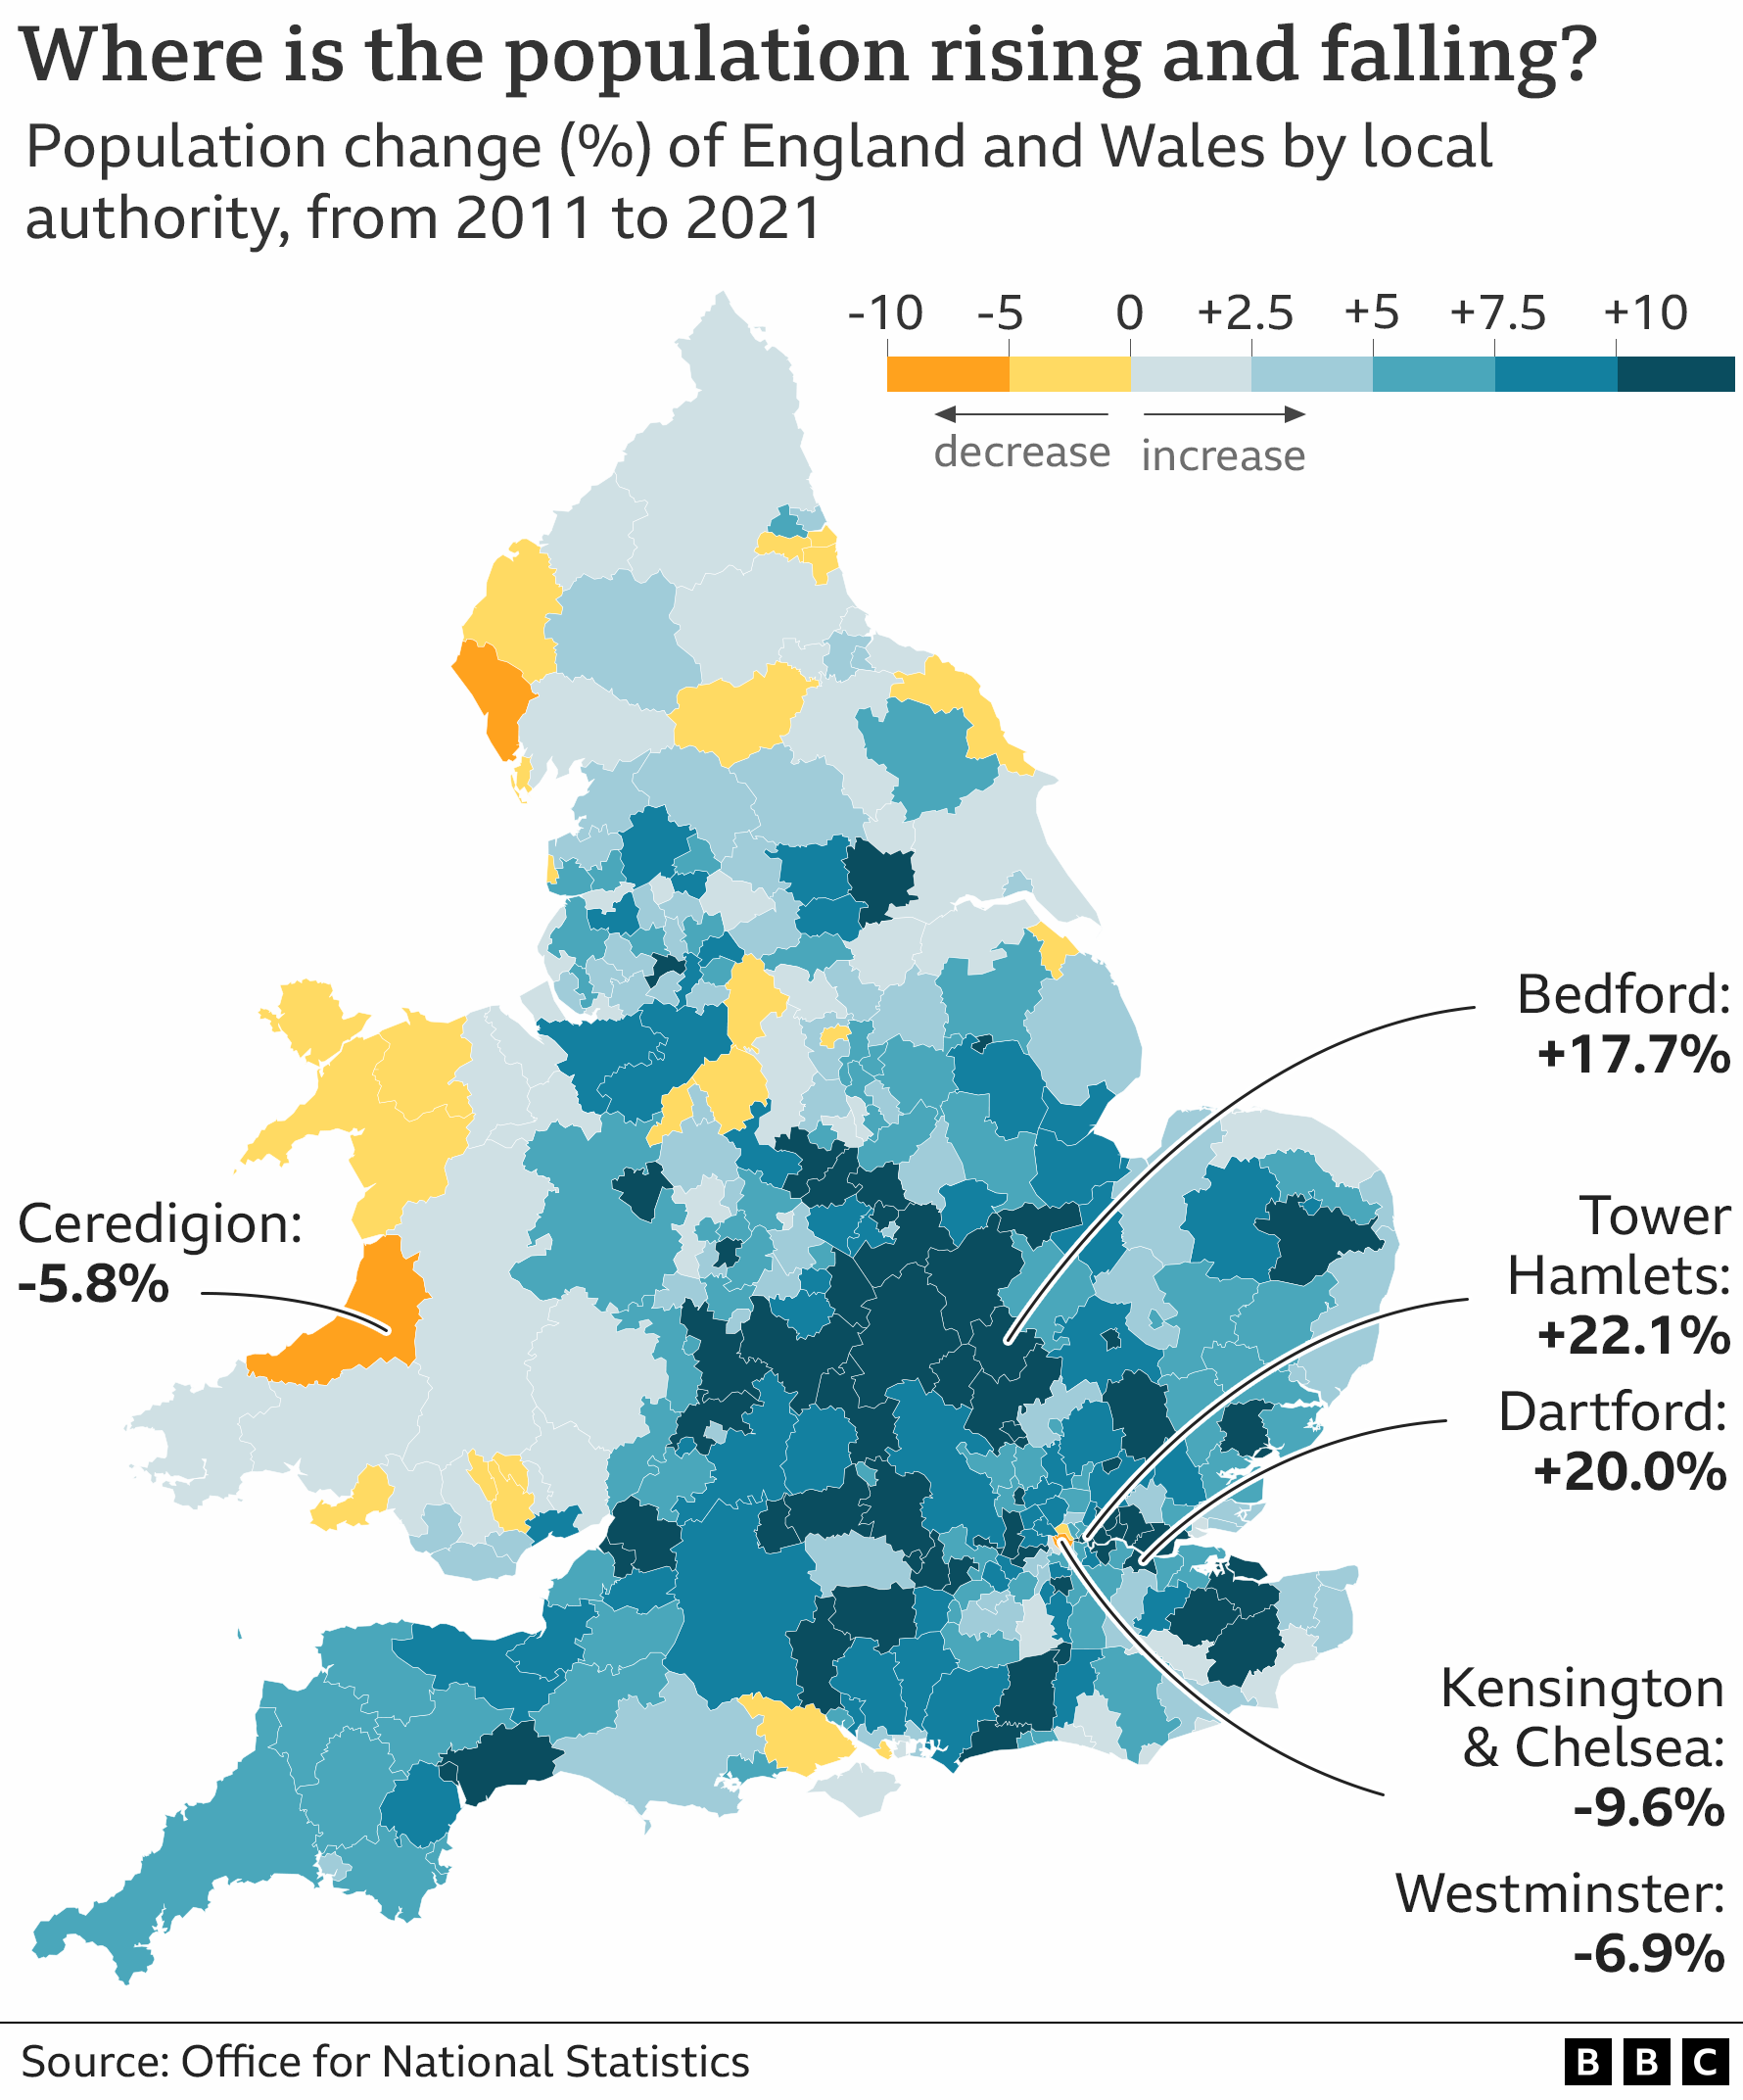 Map showing population change in areas of England and Wales between 2011 and 2021